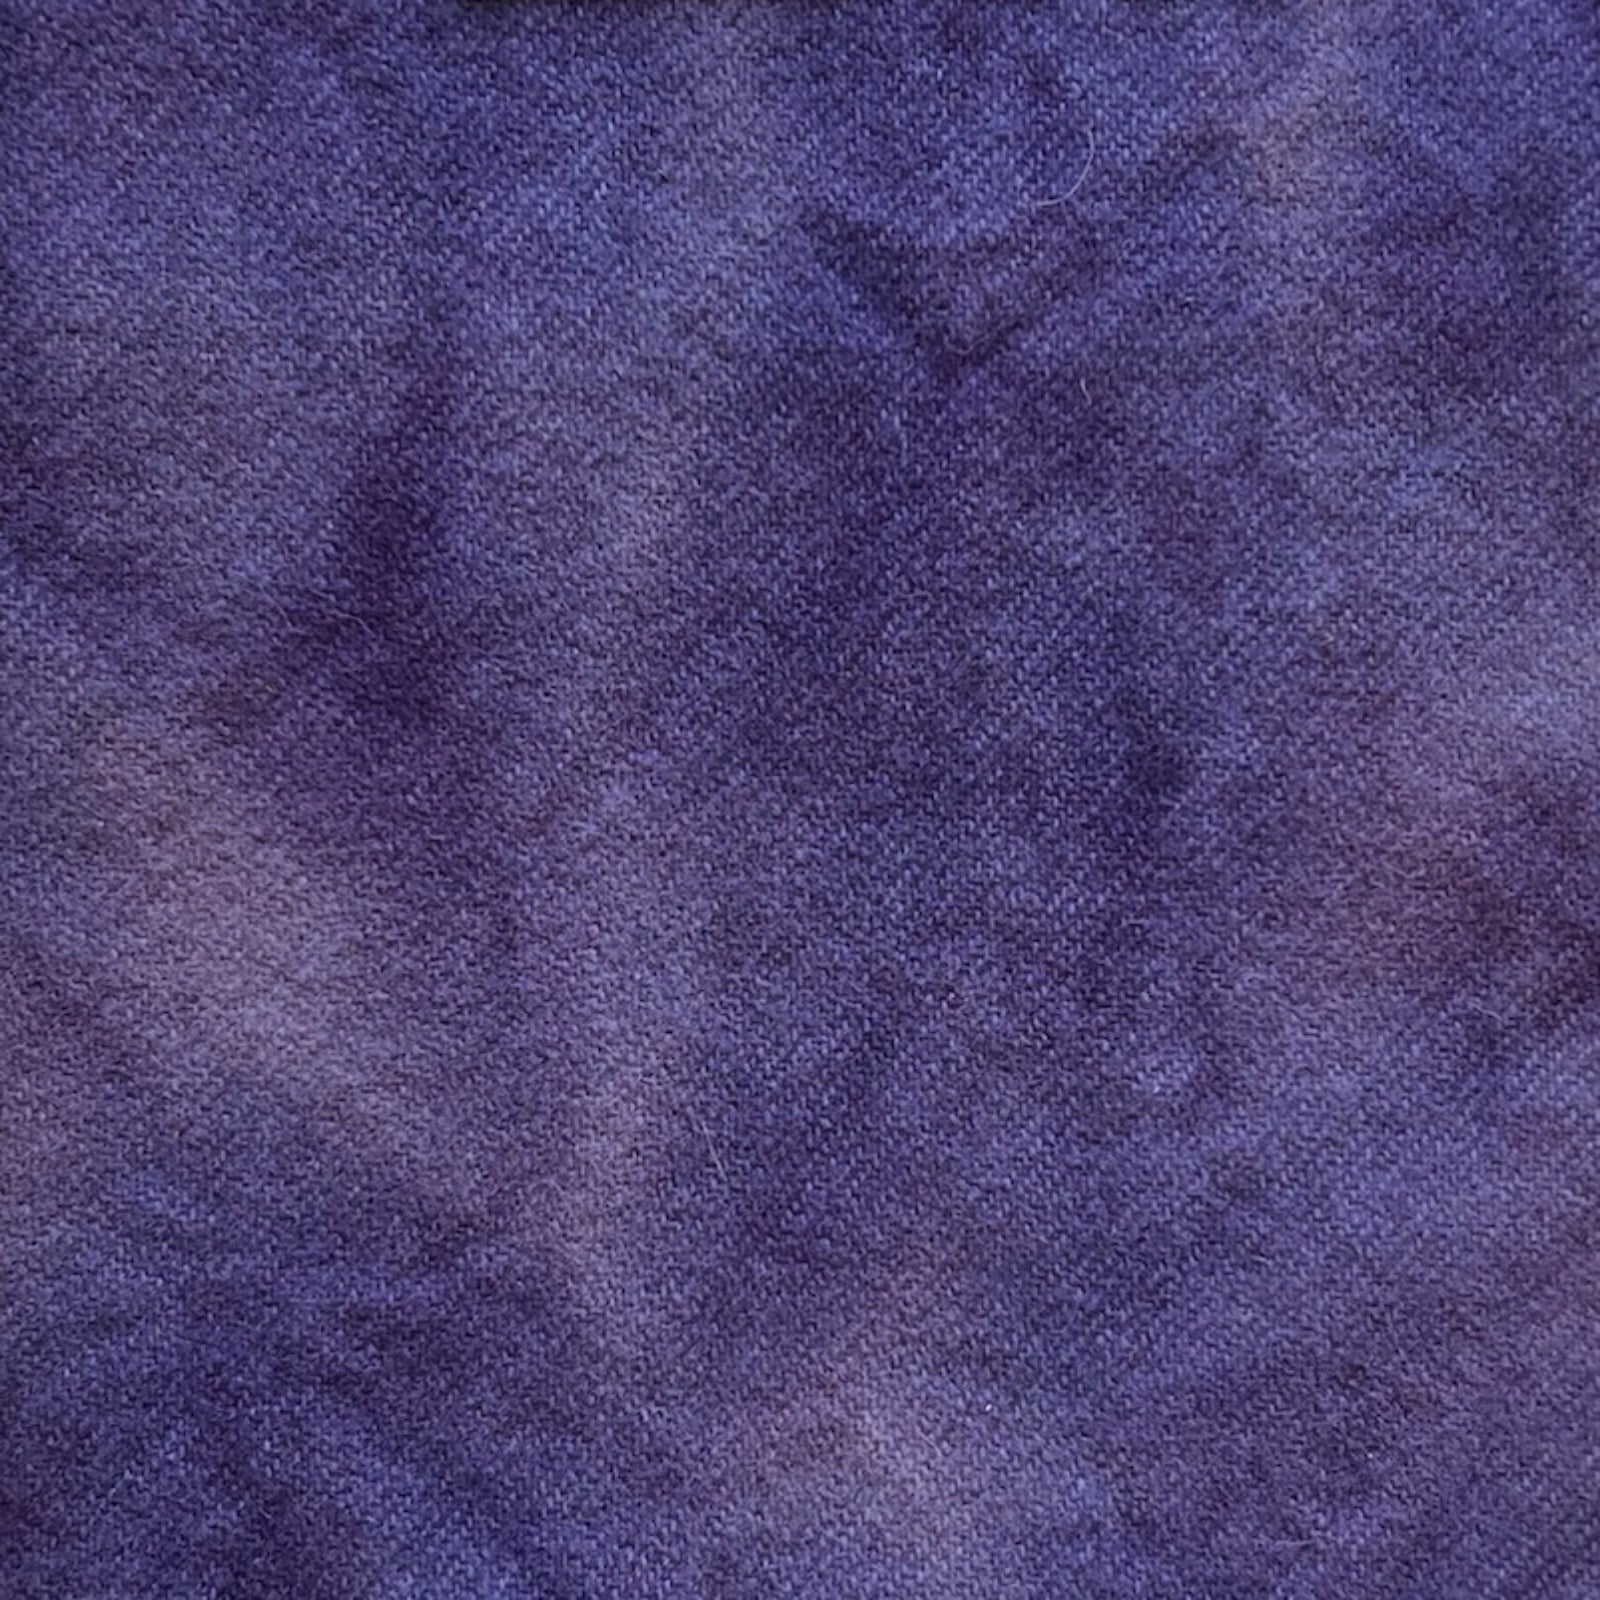 Deep Water - Colorama Hand Dyed Wool - Offered by HoneyBee Hive Rug Hooking